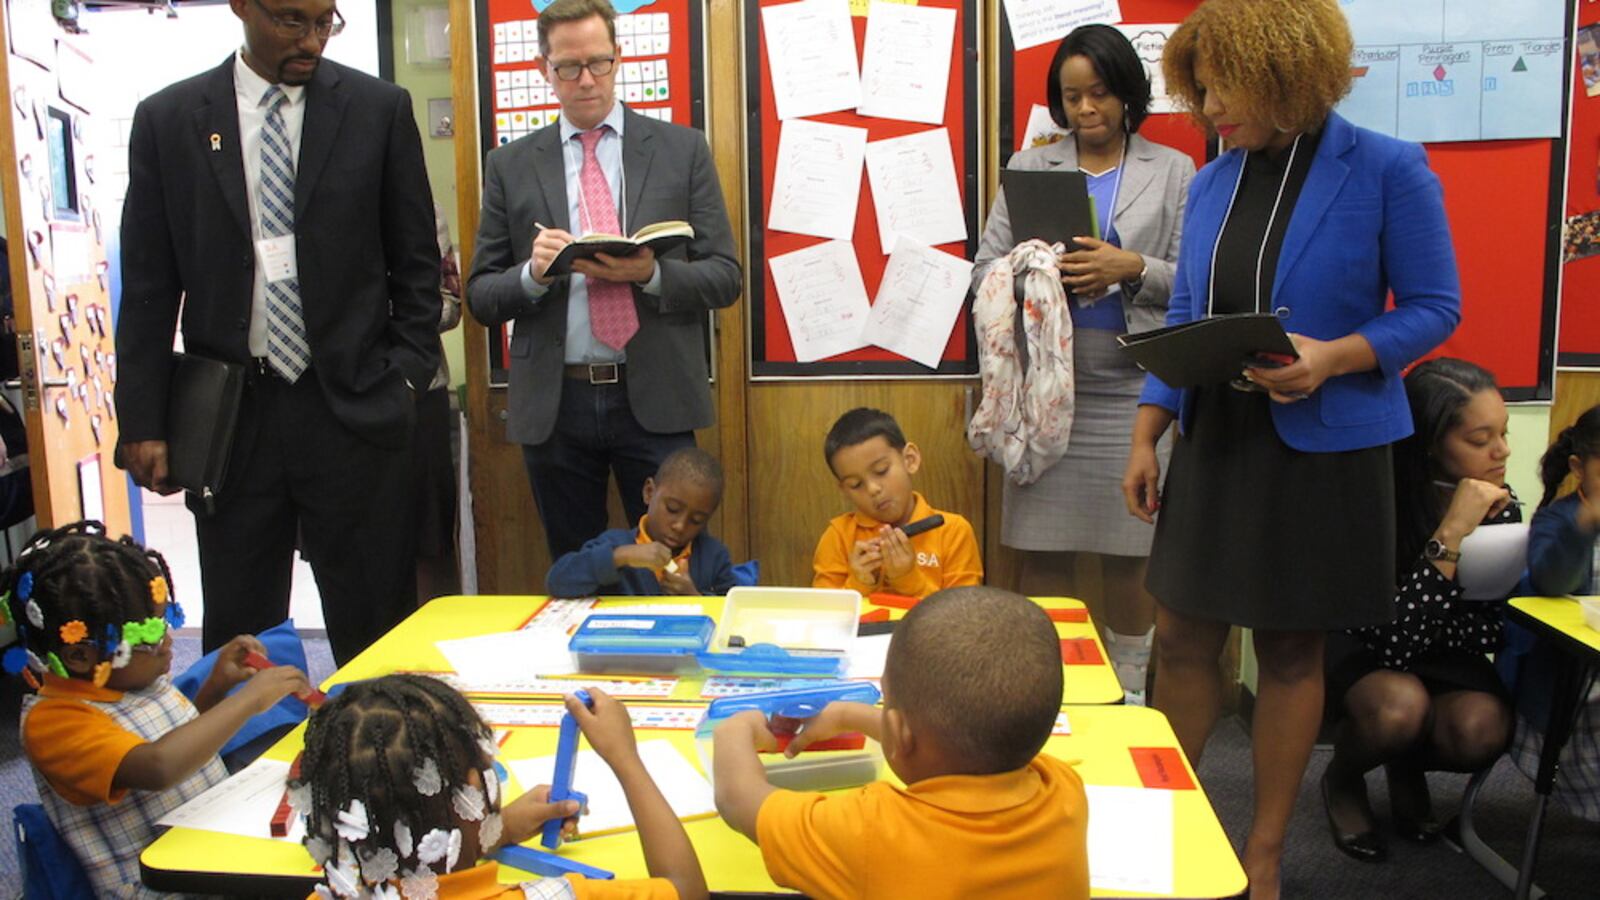 School leaders from charter and district schools visited Success Academy Harlem 5.